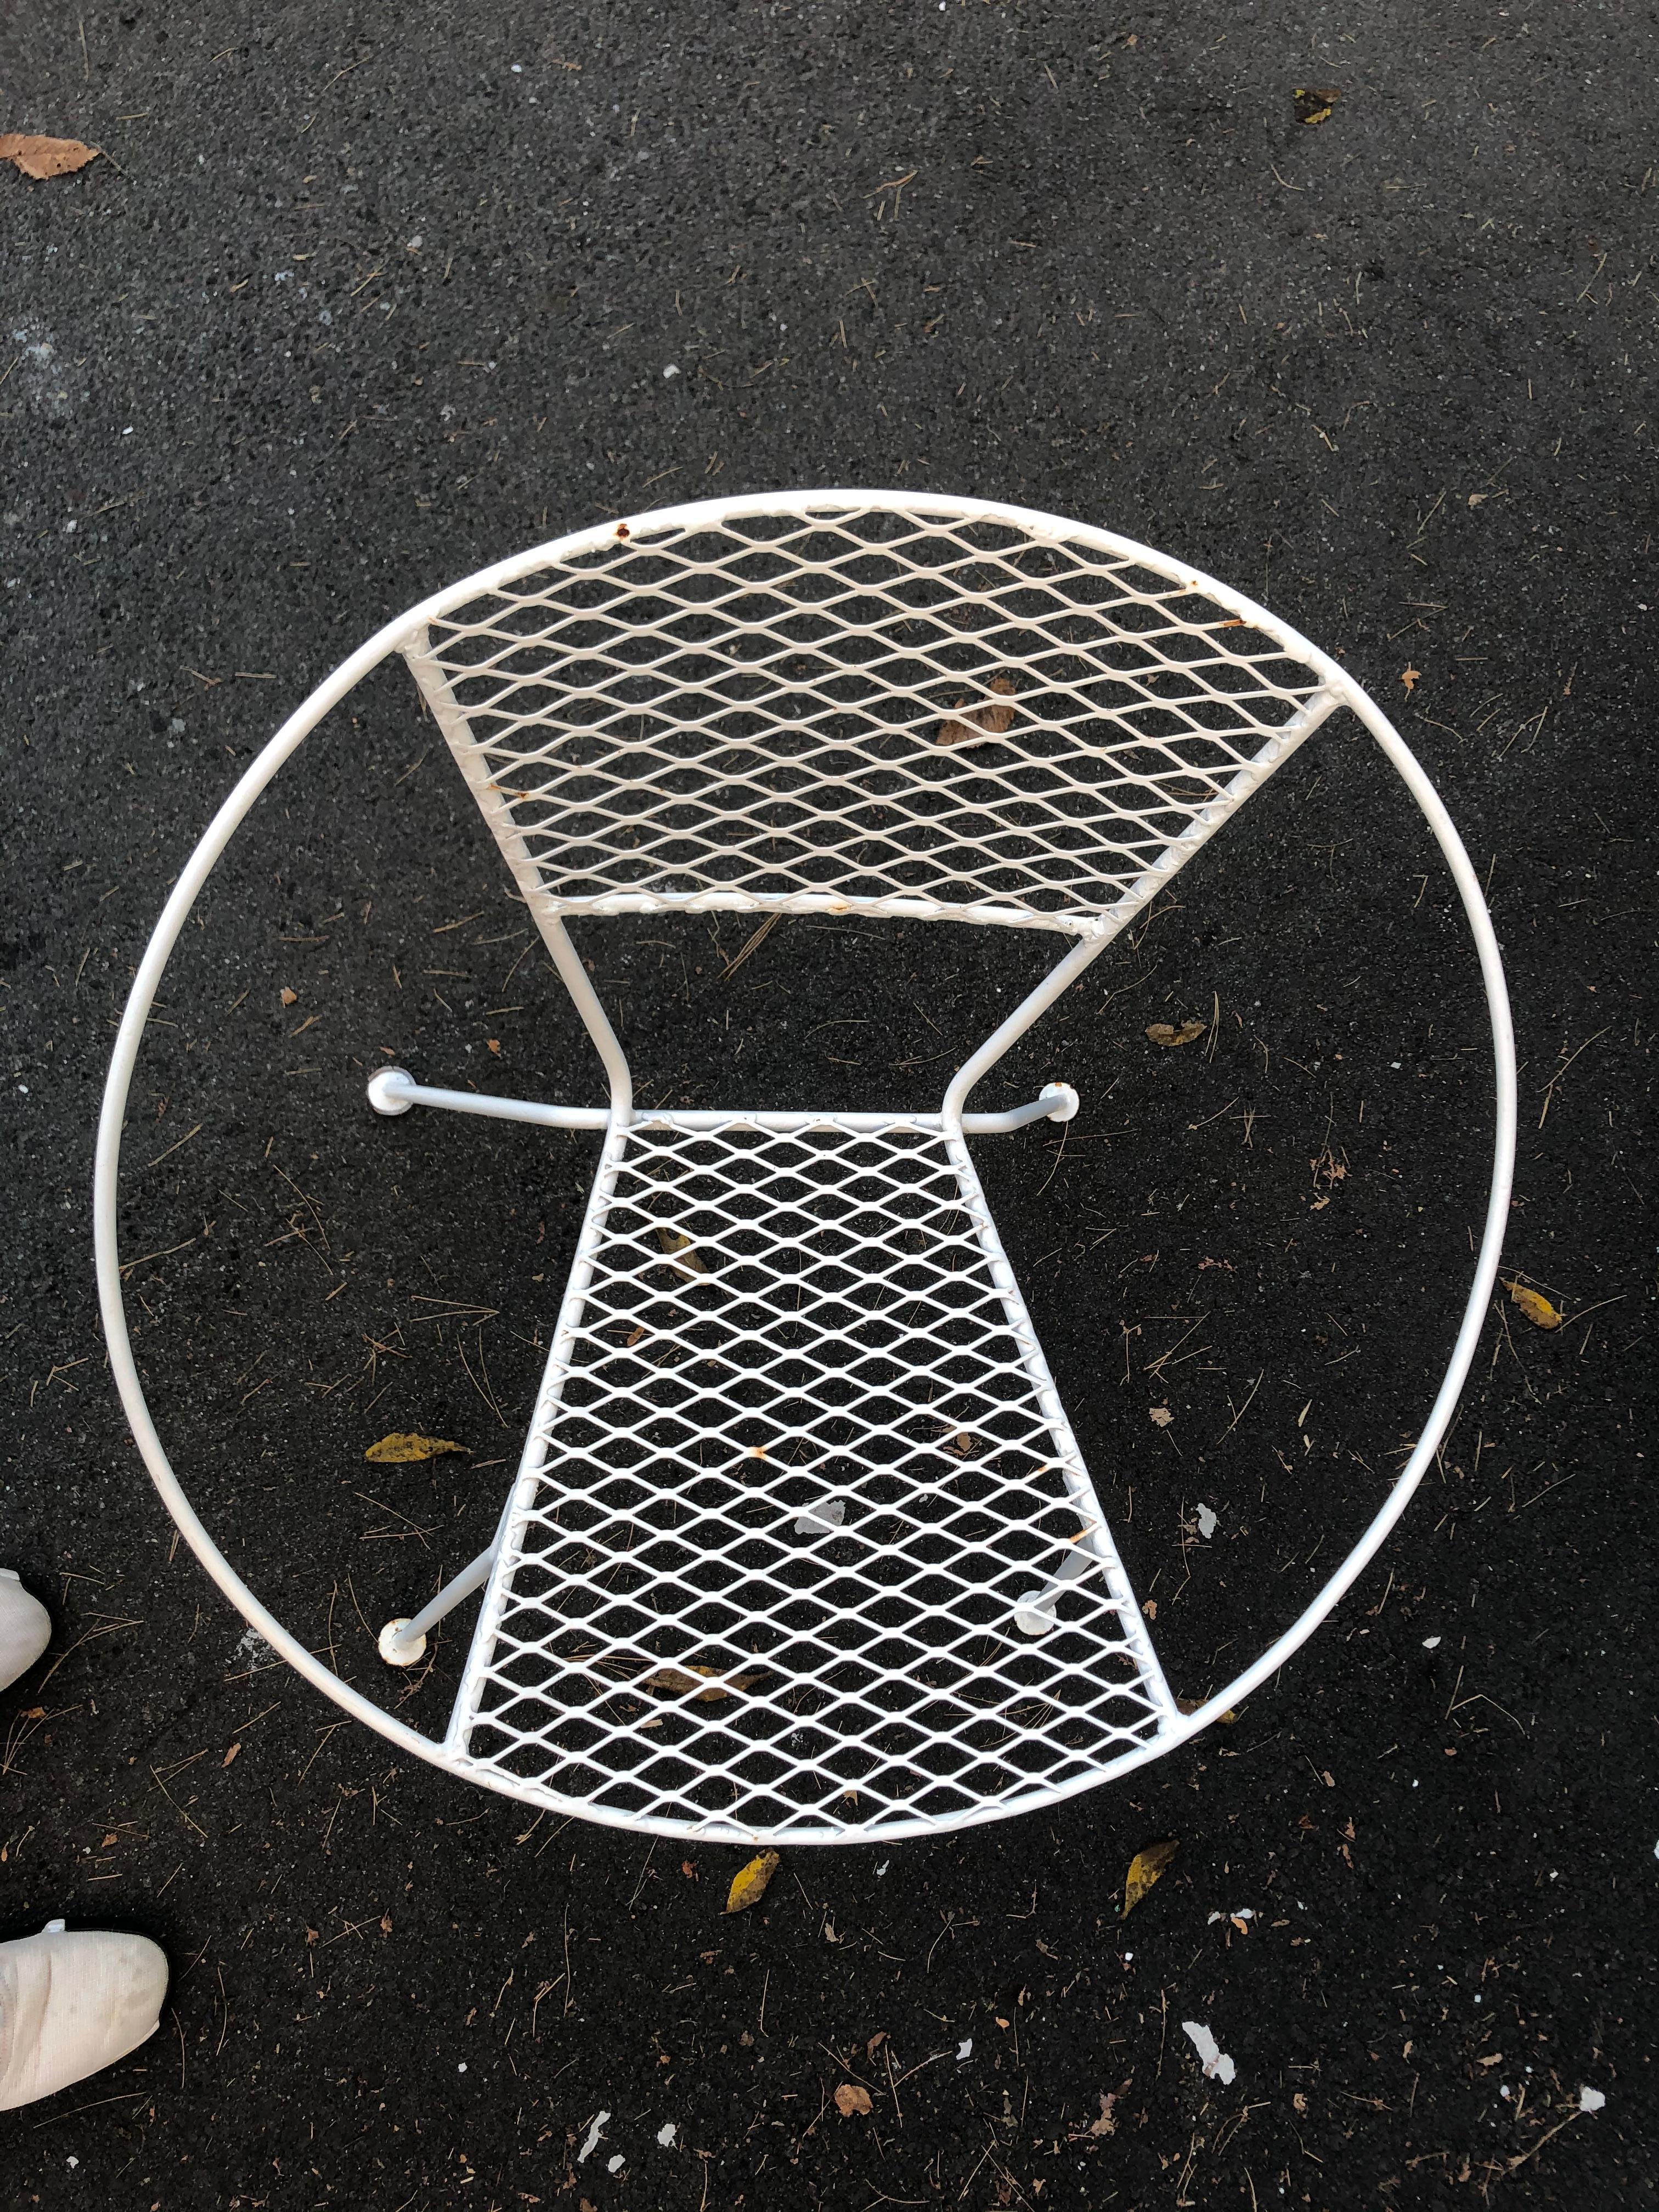 Chic Pair of Mid-Century Modern Circular Shaped Patio Chairs 1